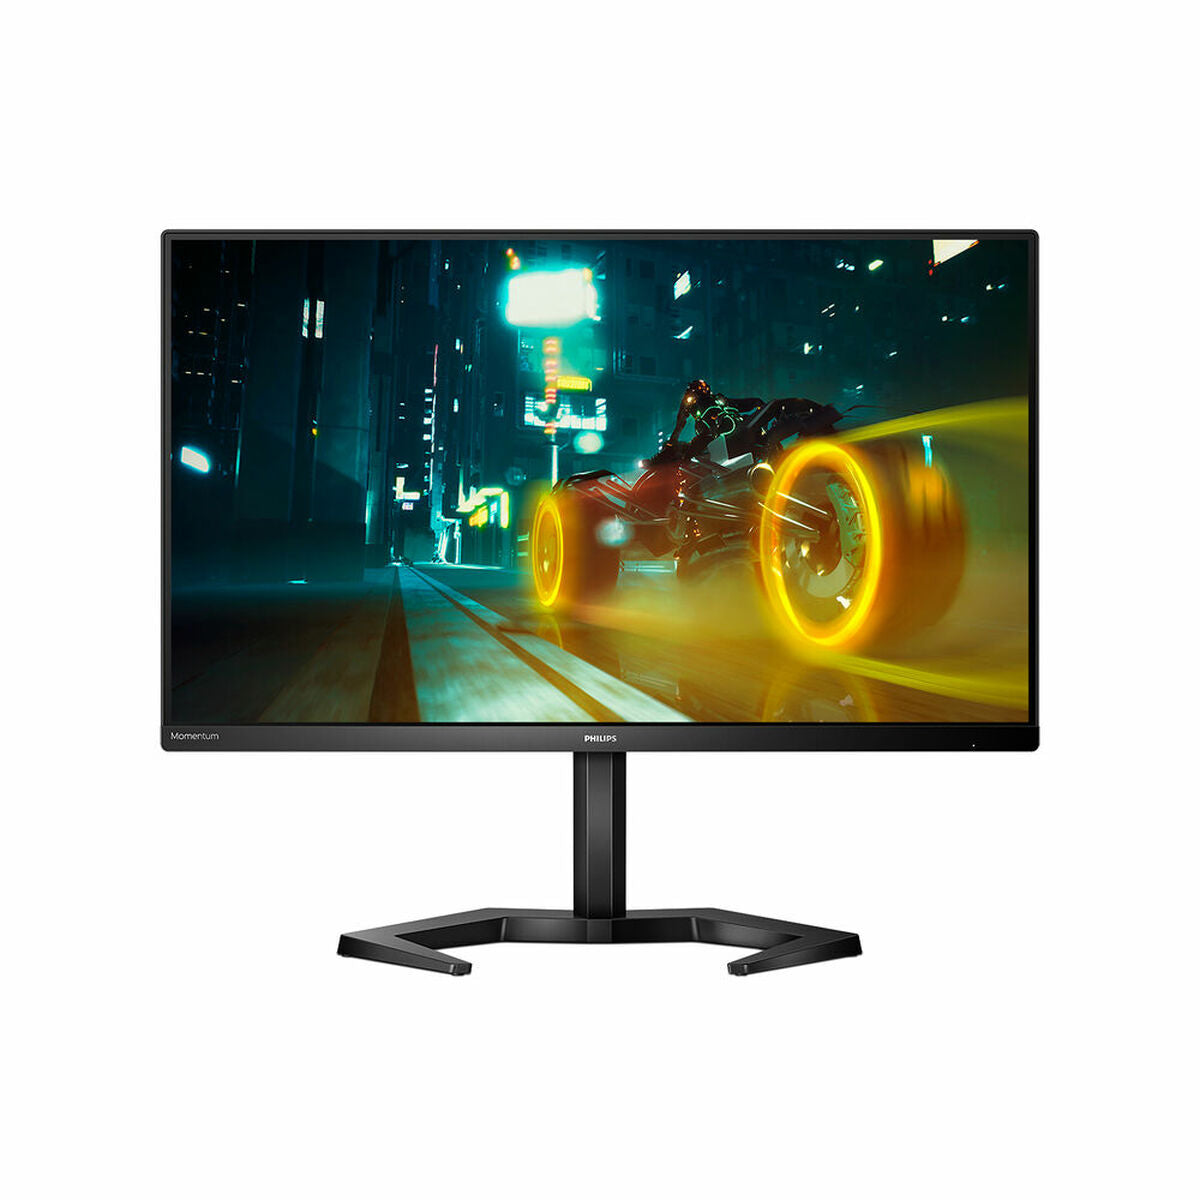 Monitor Philips 23,8'' M-line 3000 IPS 24" FHD LCD 23,8" LED IPS Flicker free 165 Hz